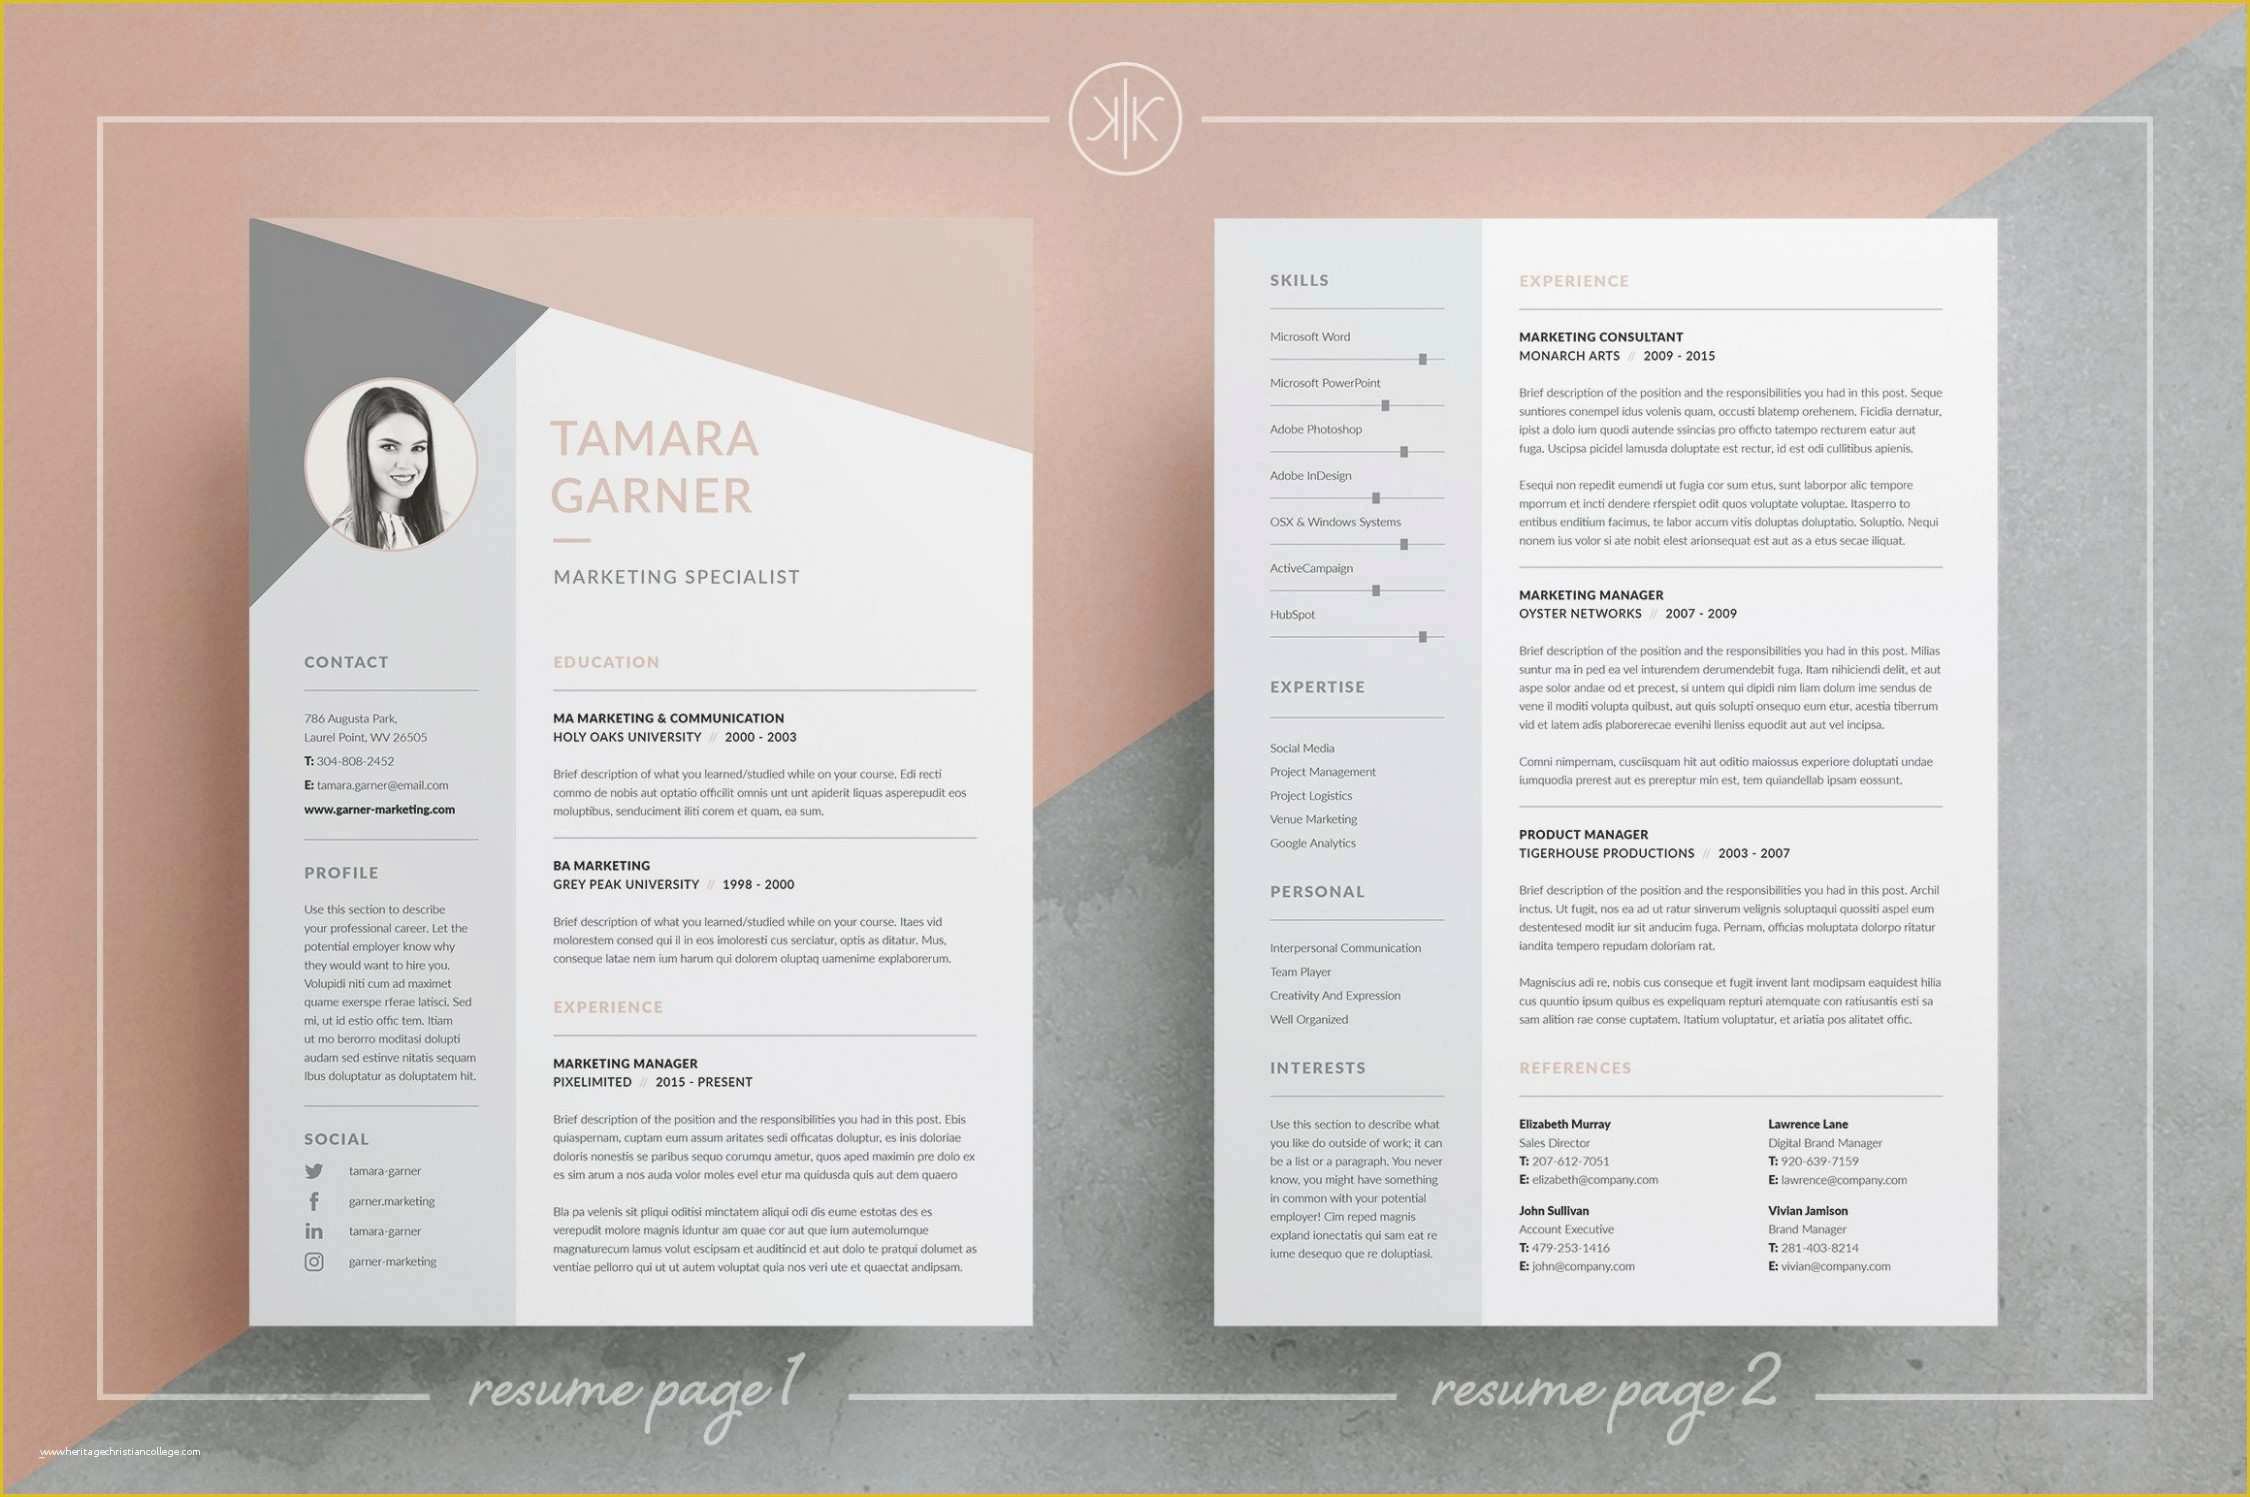 Indesign Resume Template Free Download Of Resume and Template Creative Resume Indesign Template